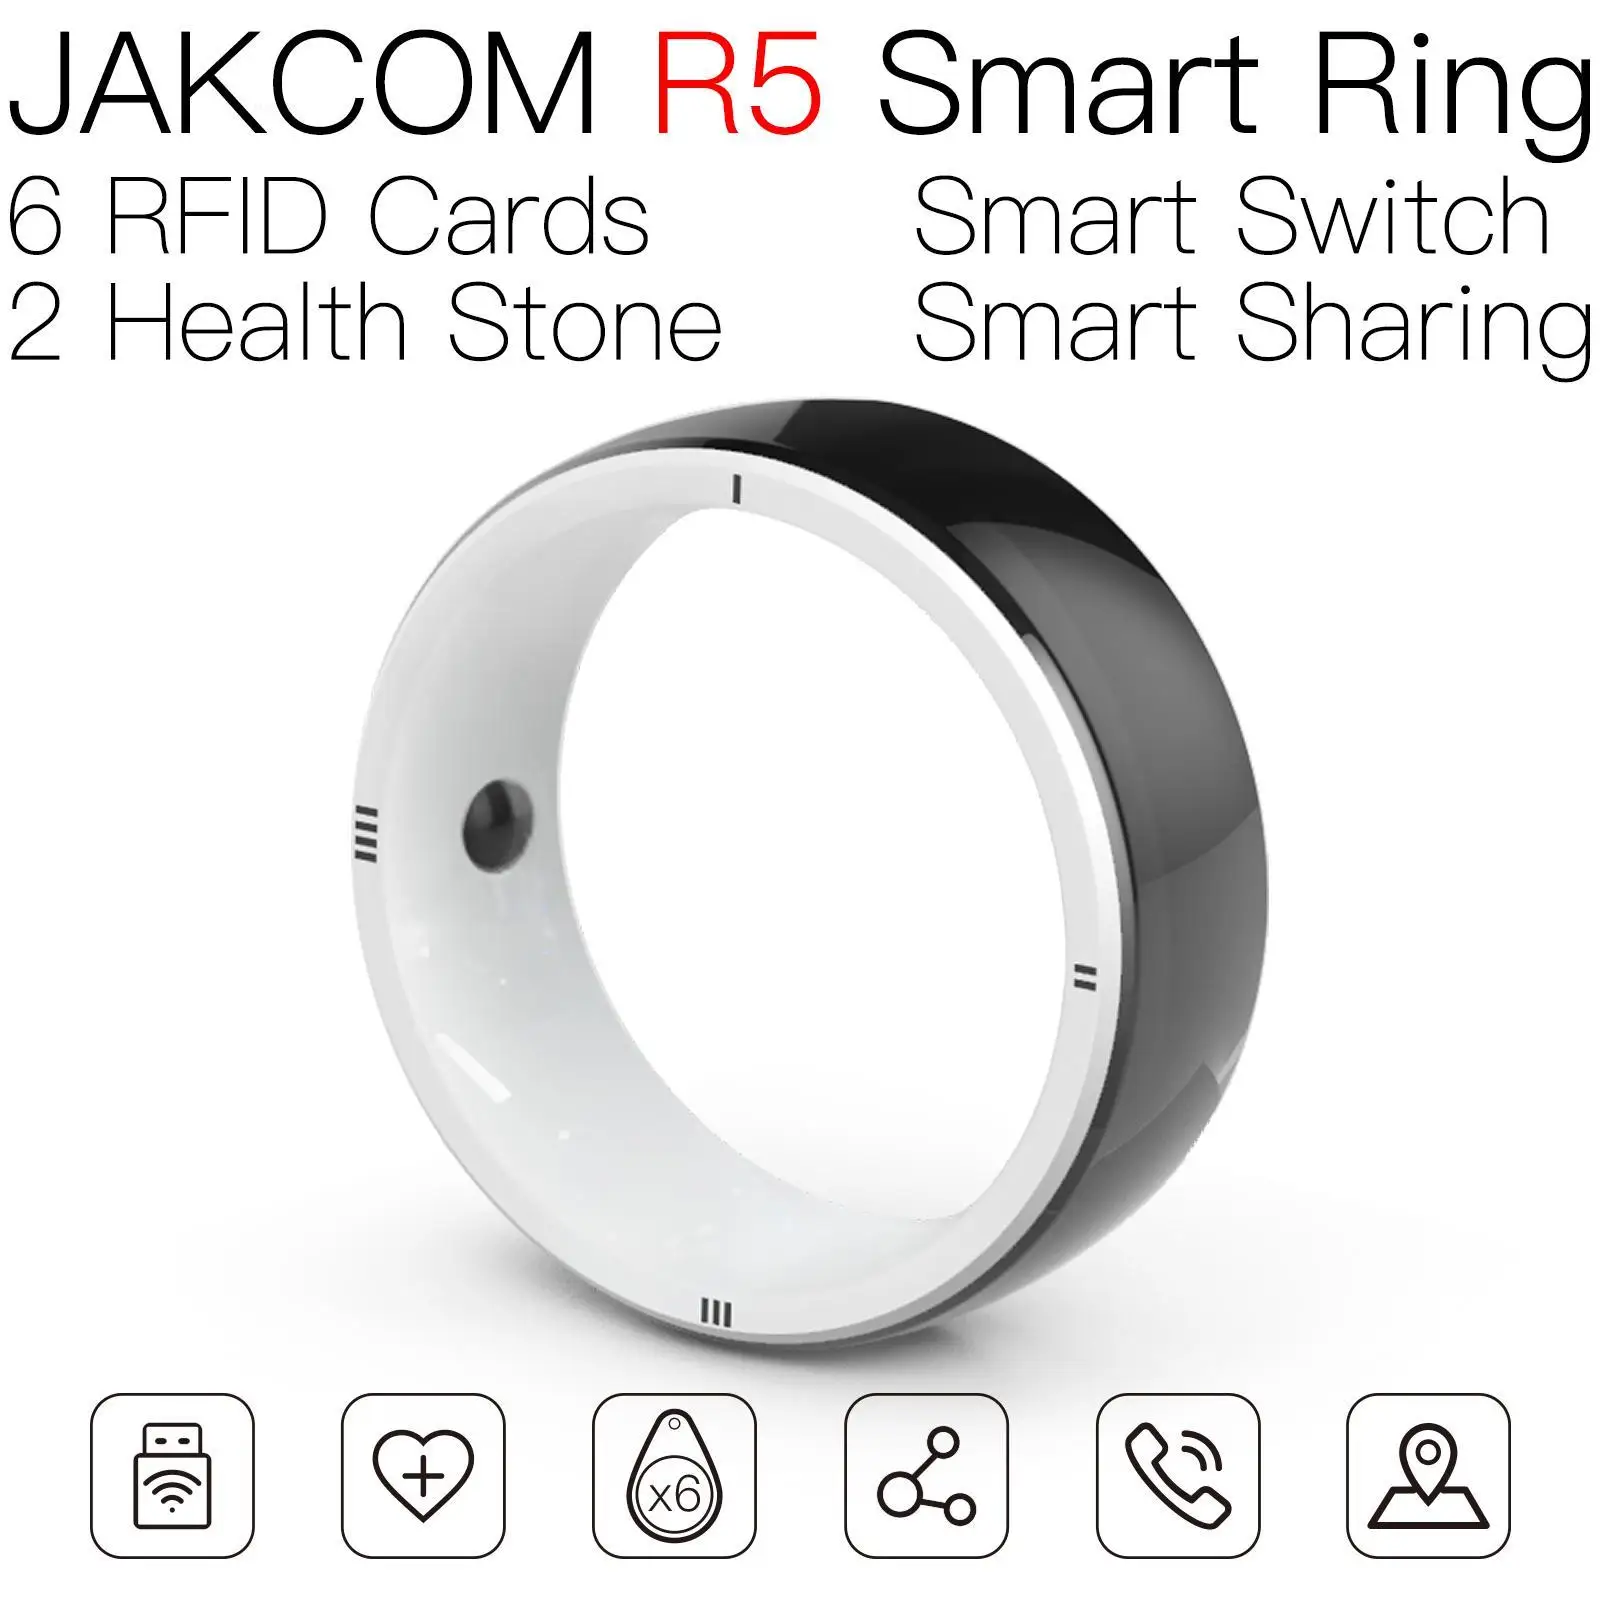 

JAKCOM R5 Smart Ring Super value than cow ears accessibly tag flexible rfid nfc sticker with my logo interruptor re for dog pvc